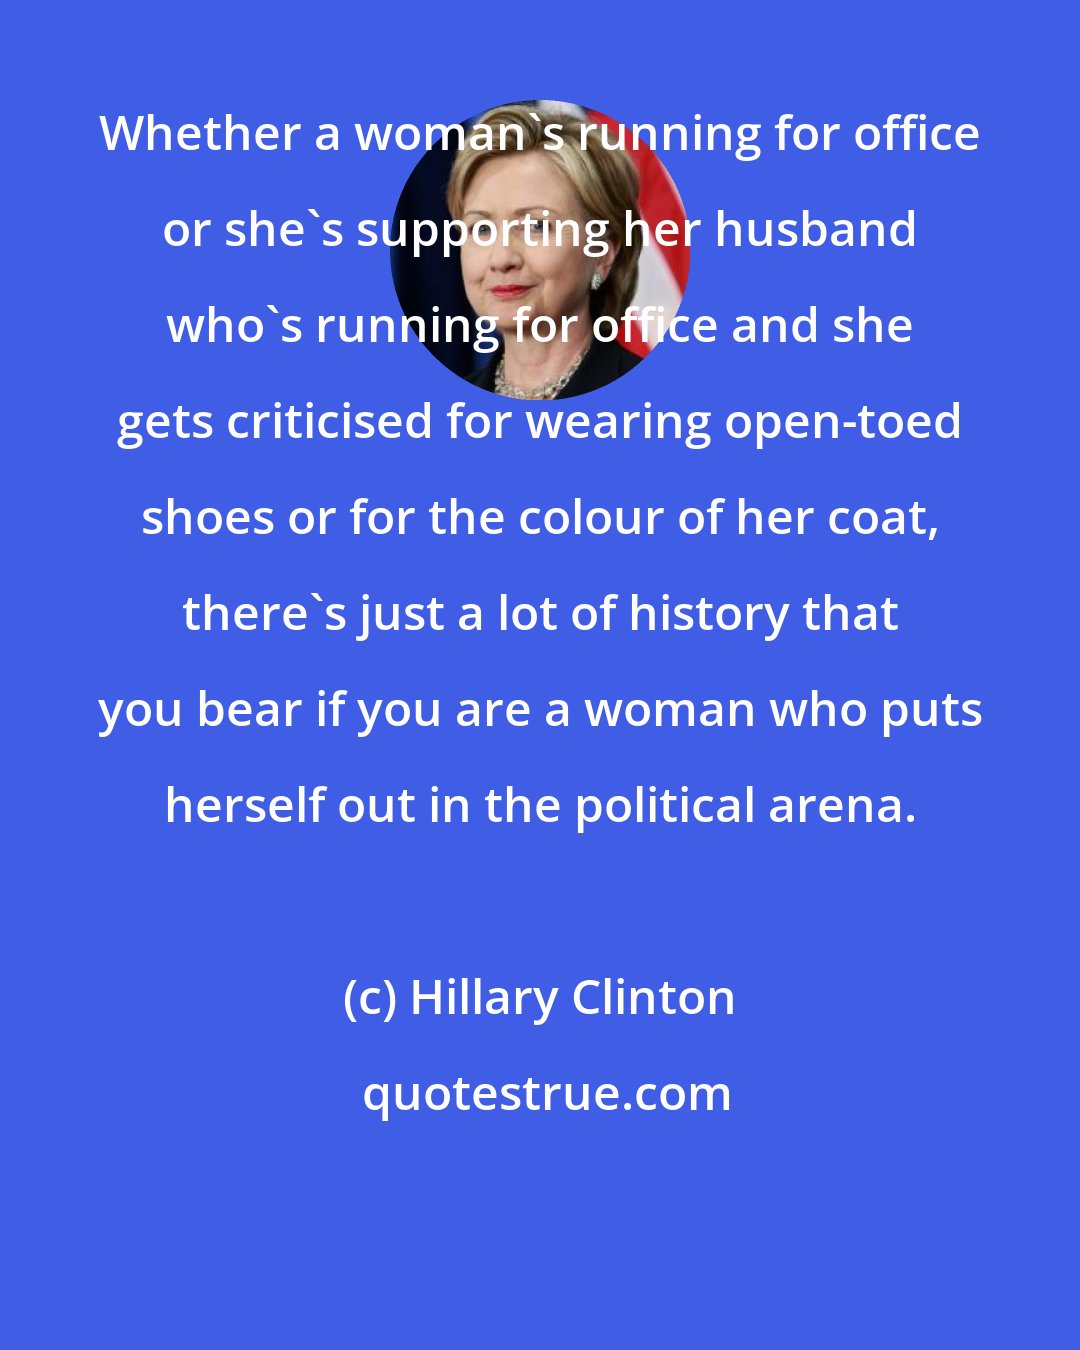 Hillary Clinton: Whether a woman's running for office or she's supporting her husband who's running for office and she gets criticised for wearing open-toed shoes or for the colour of her coat, there's just a lot of history that you bear if you are a woman who puts herself out in the political arena.